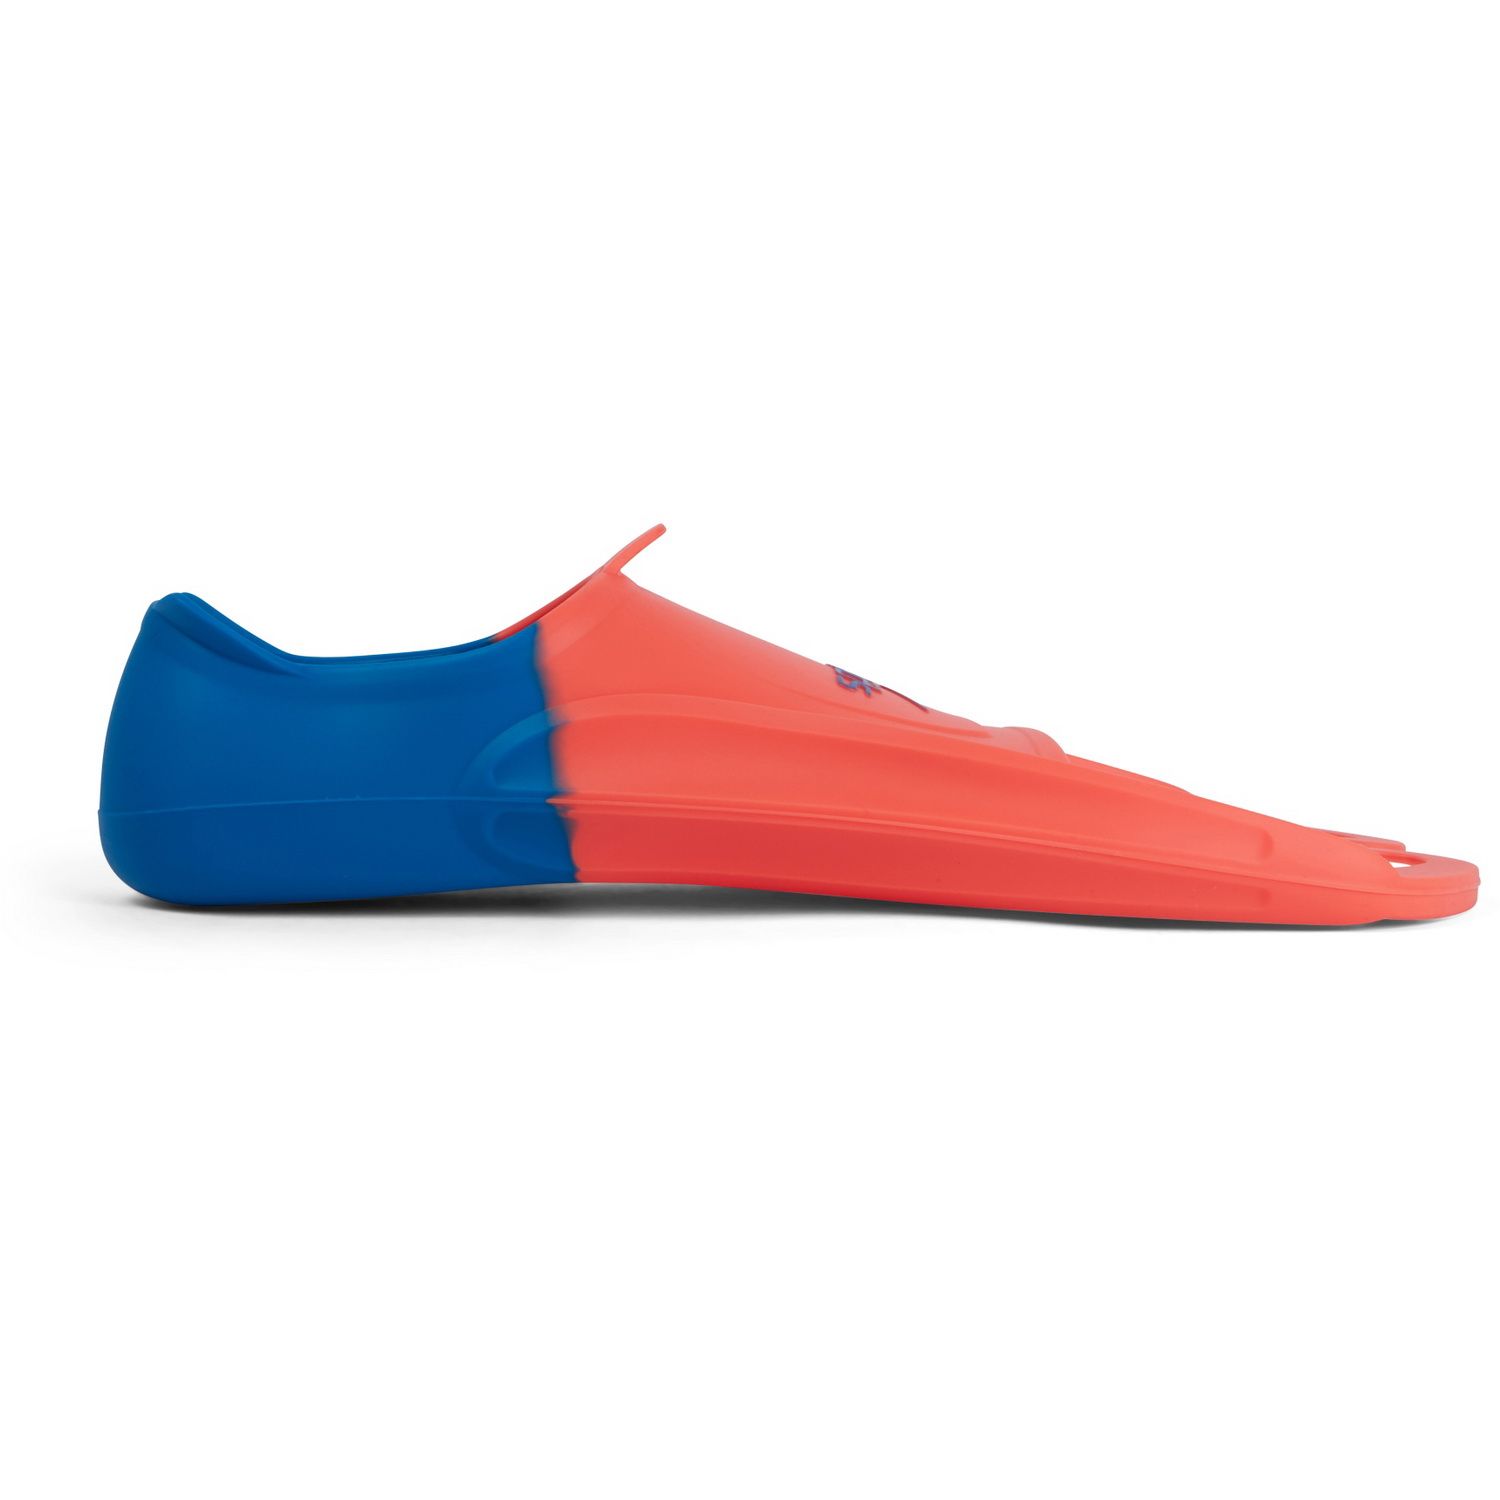 Plavecké plutvy TRAINING FIN - RED/BLUE 